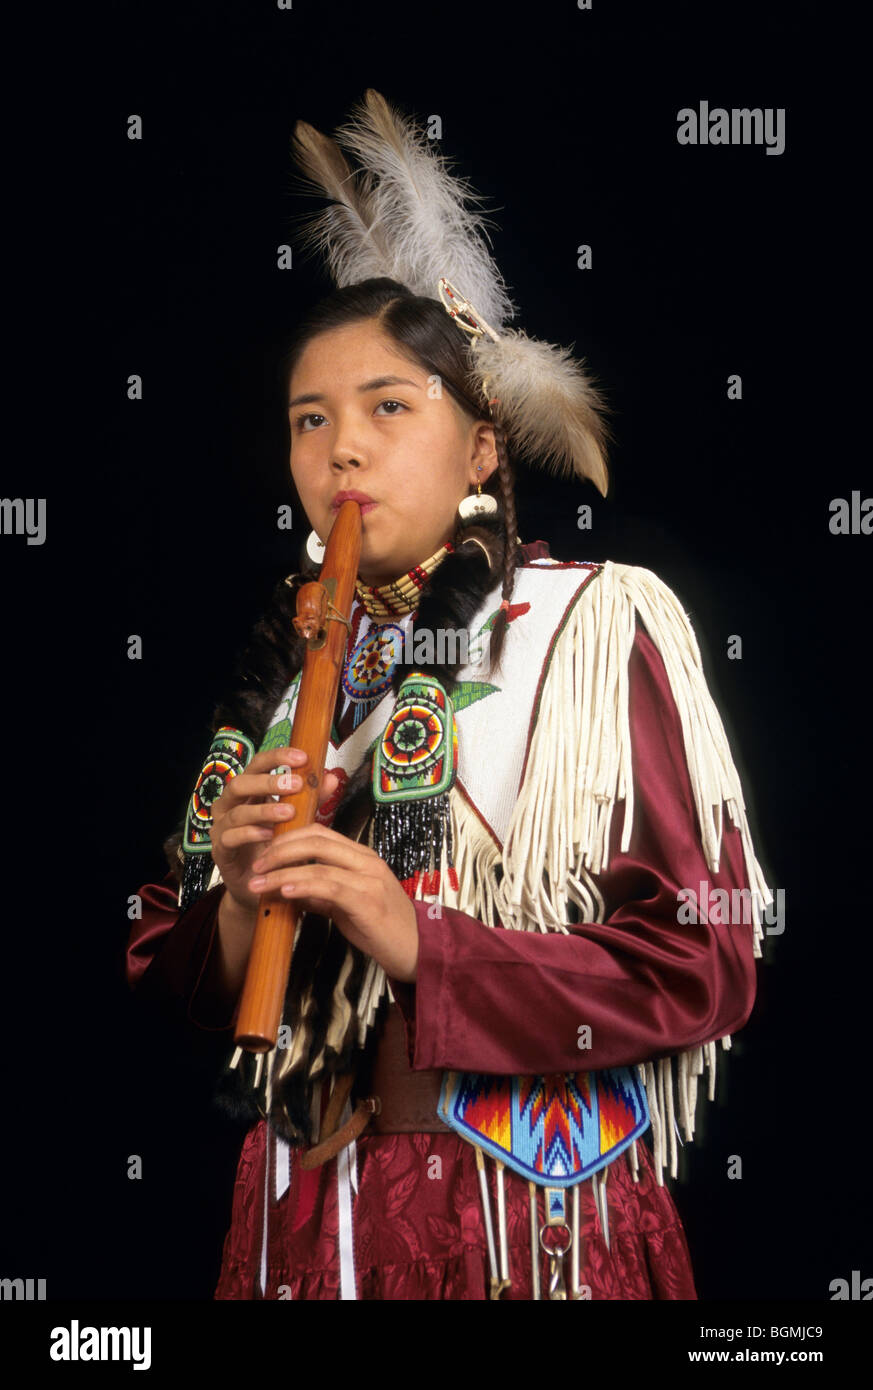 Native American teenage girl dressed in traditional dress decorated with beadwork plays traditional wooden flute Stock Photo